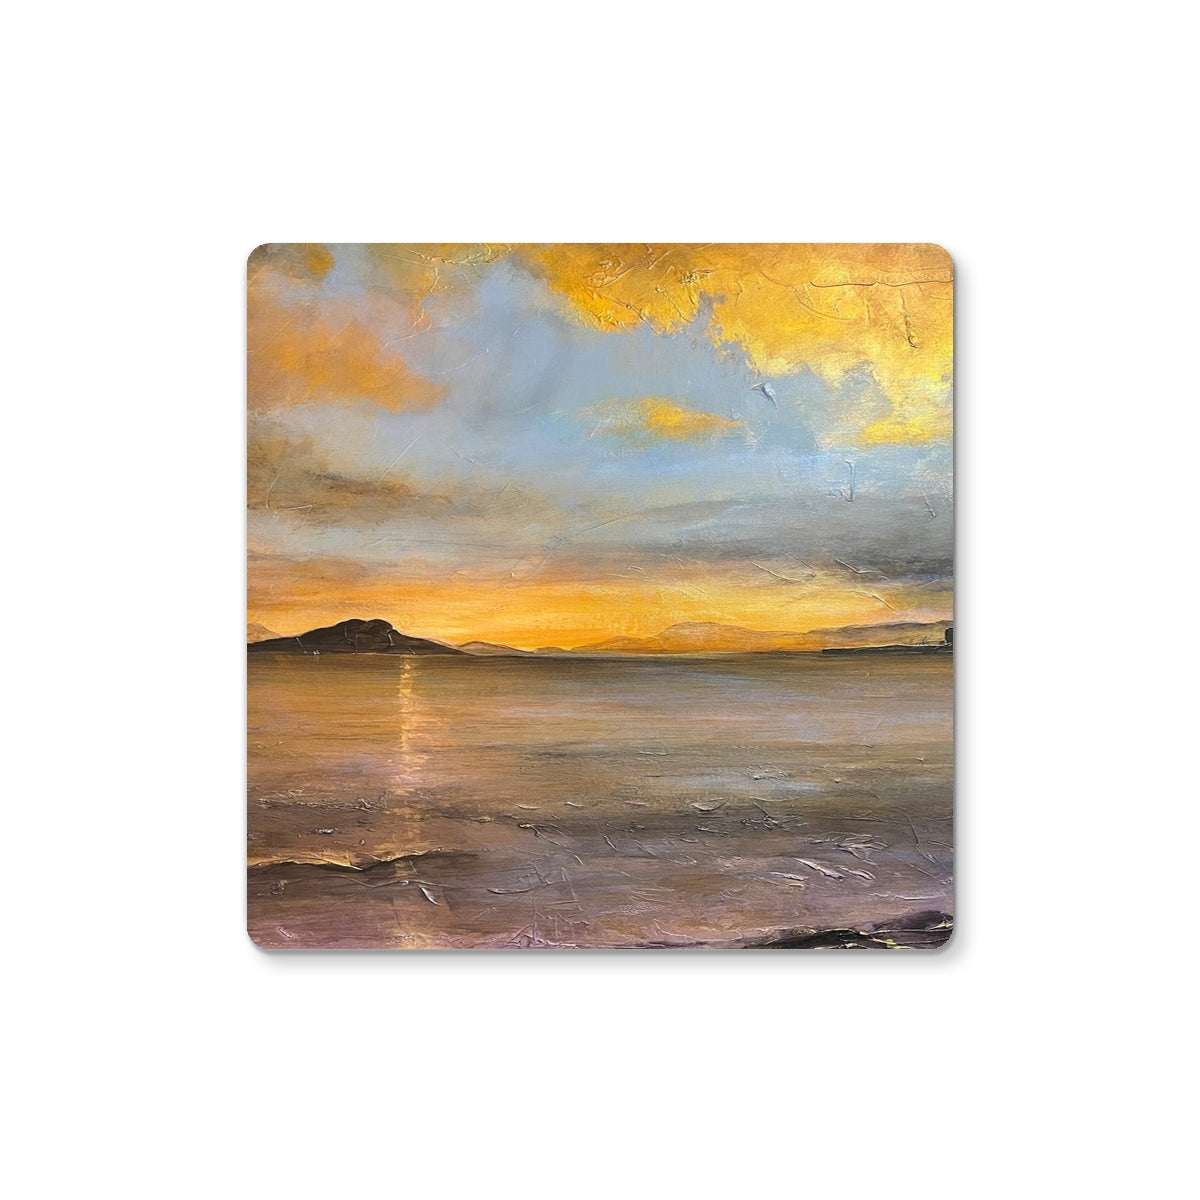 Loch Linnhe Sunset Art Gifts Coaster-Coasters-Scottish Lochs & Mountains Art Gallery-2 Coasters-Paintings, Prints, Homeware, Art Gifts From Scotland By Scottish Artist Kevin Hunter